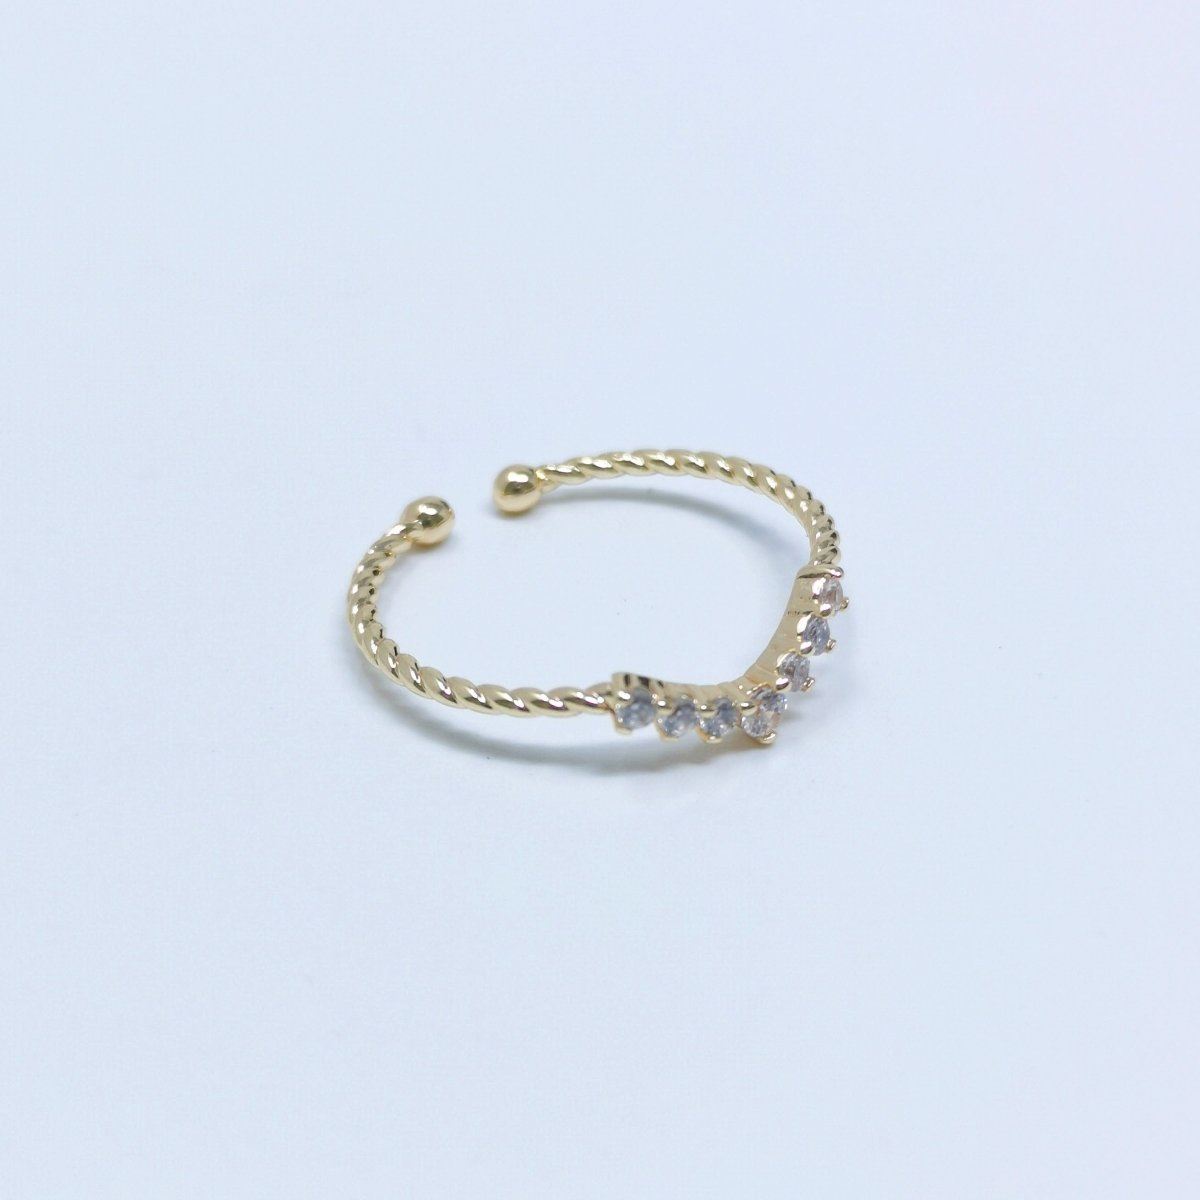 Dainty Twisted Ring, Chevron Ring, Crown Ring, Minimalist Jewelry, Open Twisted Band Ring Adjustable Ring for gift R-239 - DLUXCA